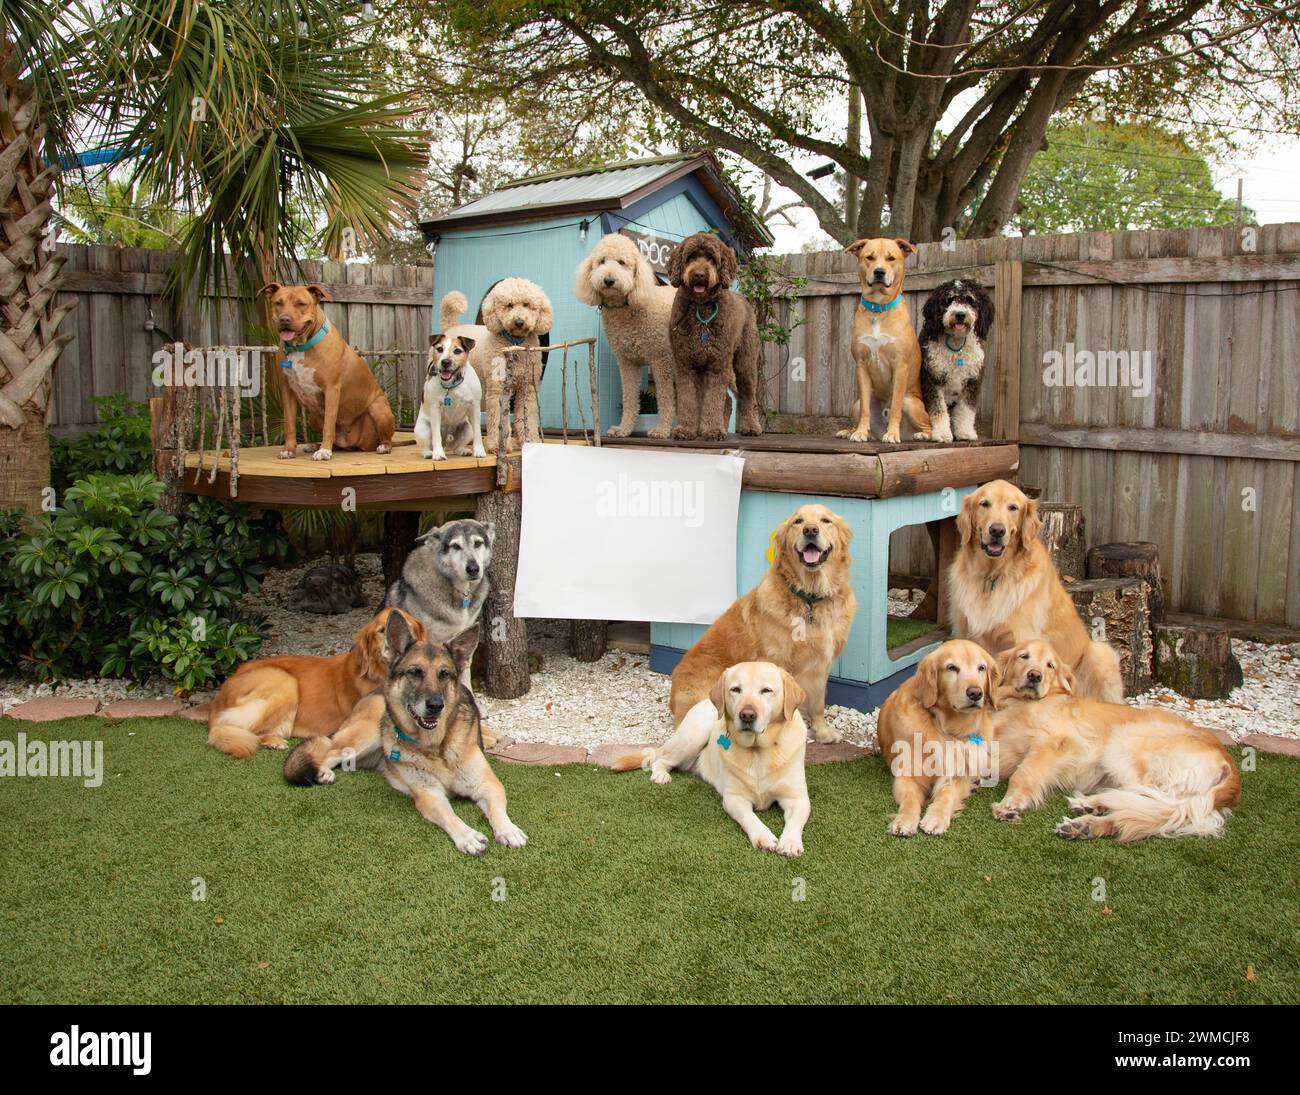 Group of assorted dogs sitting by a dog house in a garden next to a blank sign, Florida, USA Stock Photo